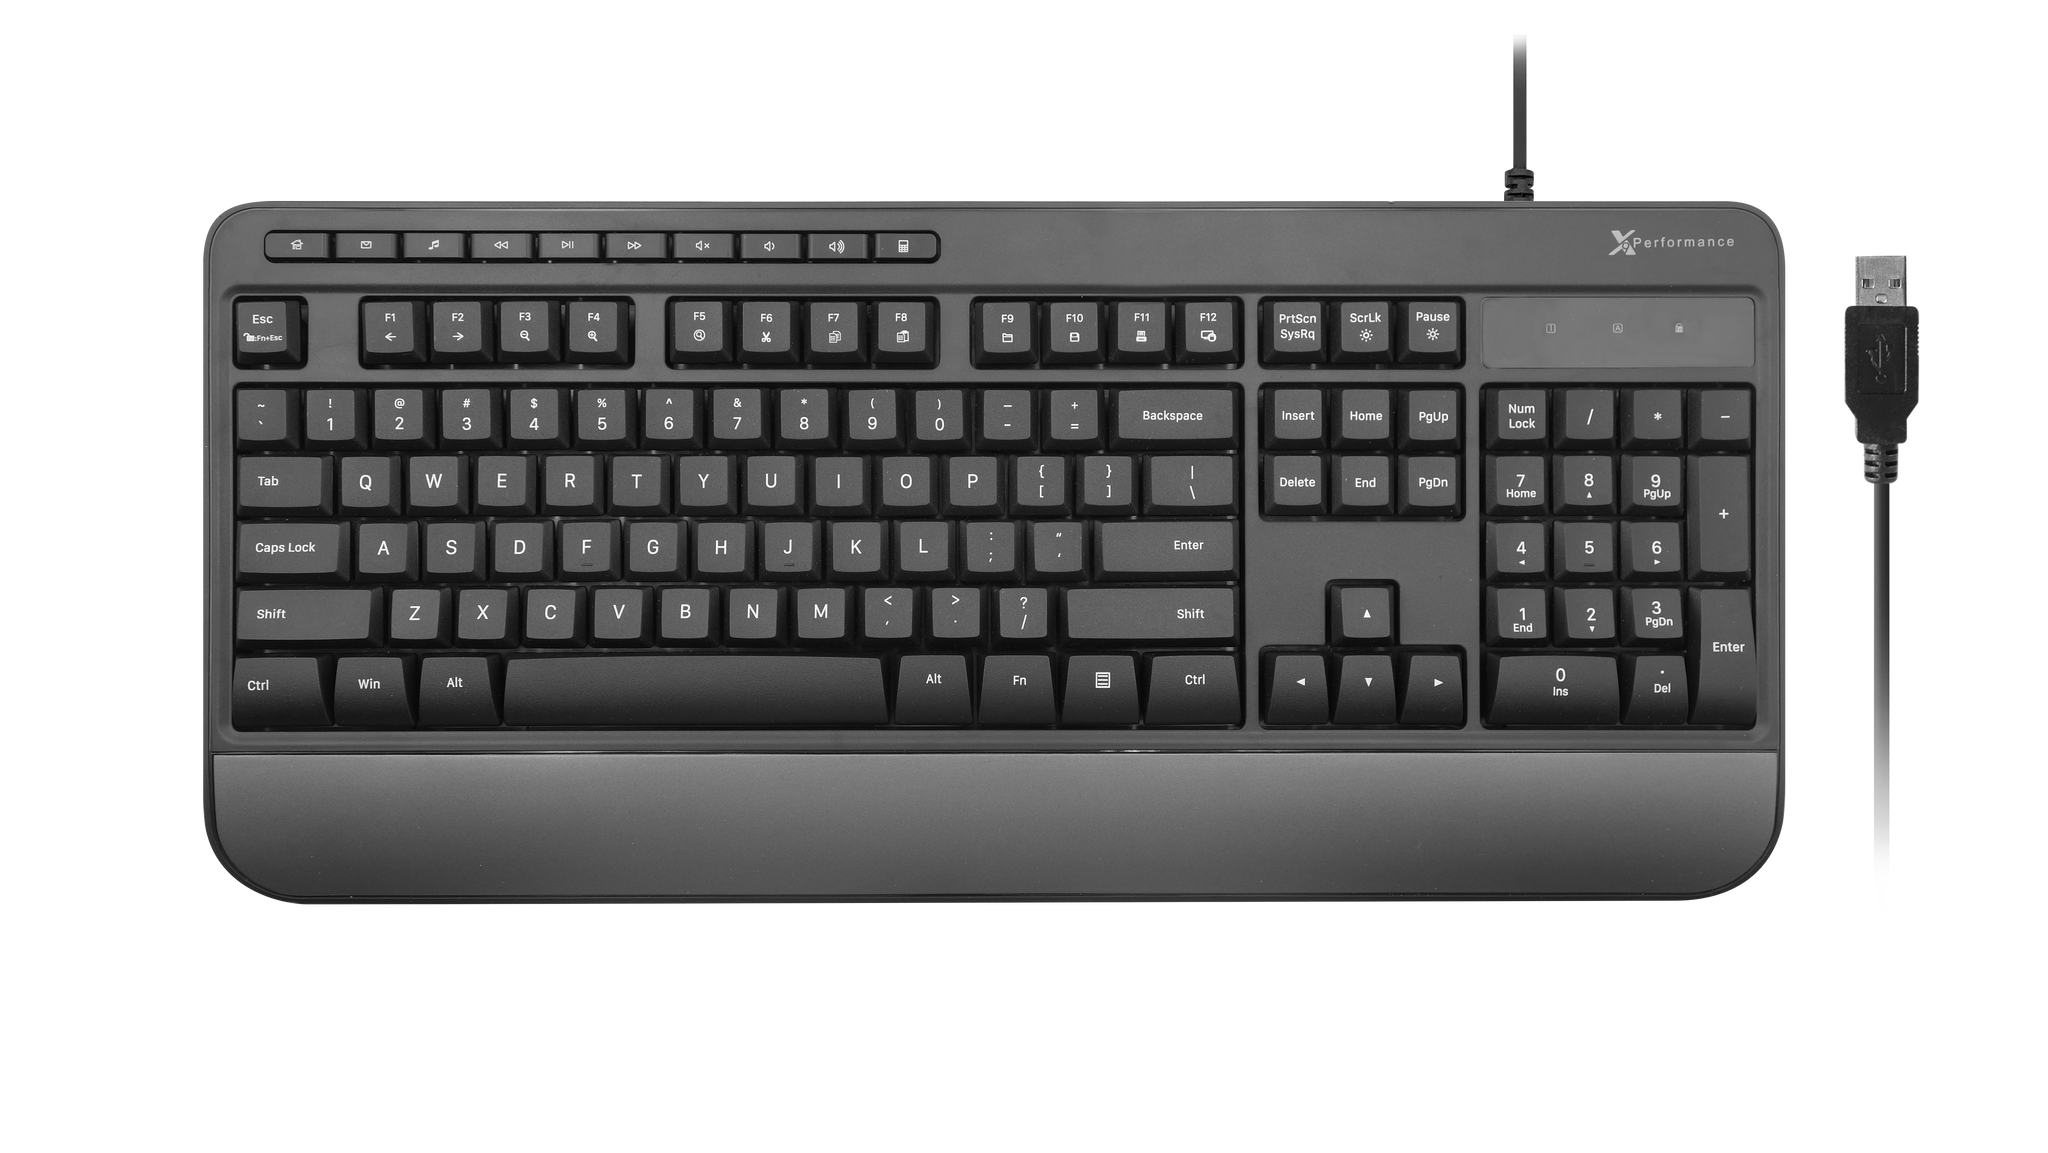 Multimedia USB Keyboard Wired - Take Control of Your Media - Full Size Keyboard with Wrist Rest and 114 Keys (10 Media and 14 Shortcut Keys)